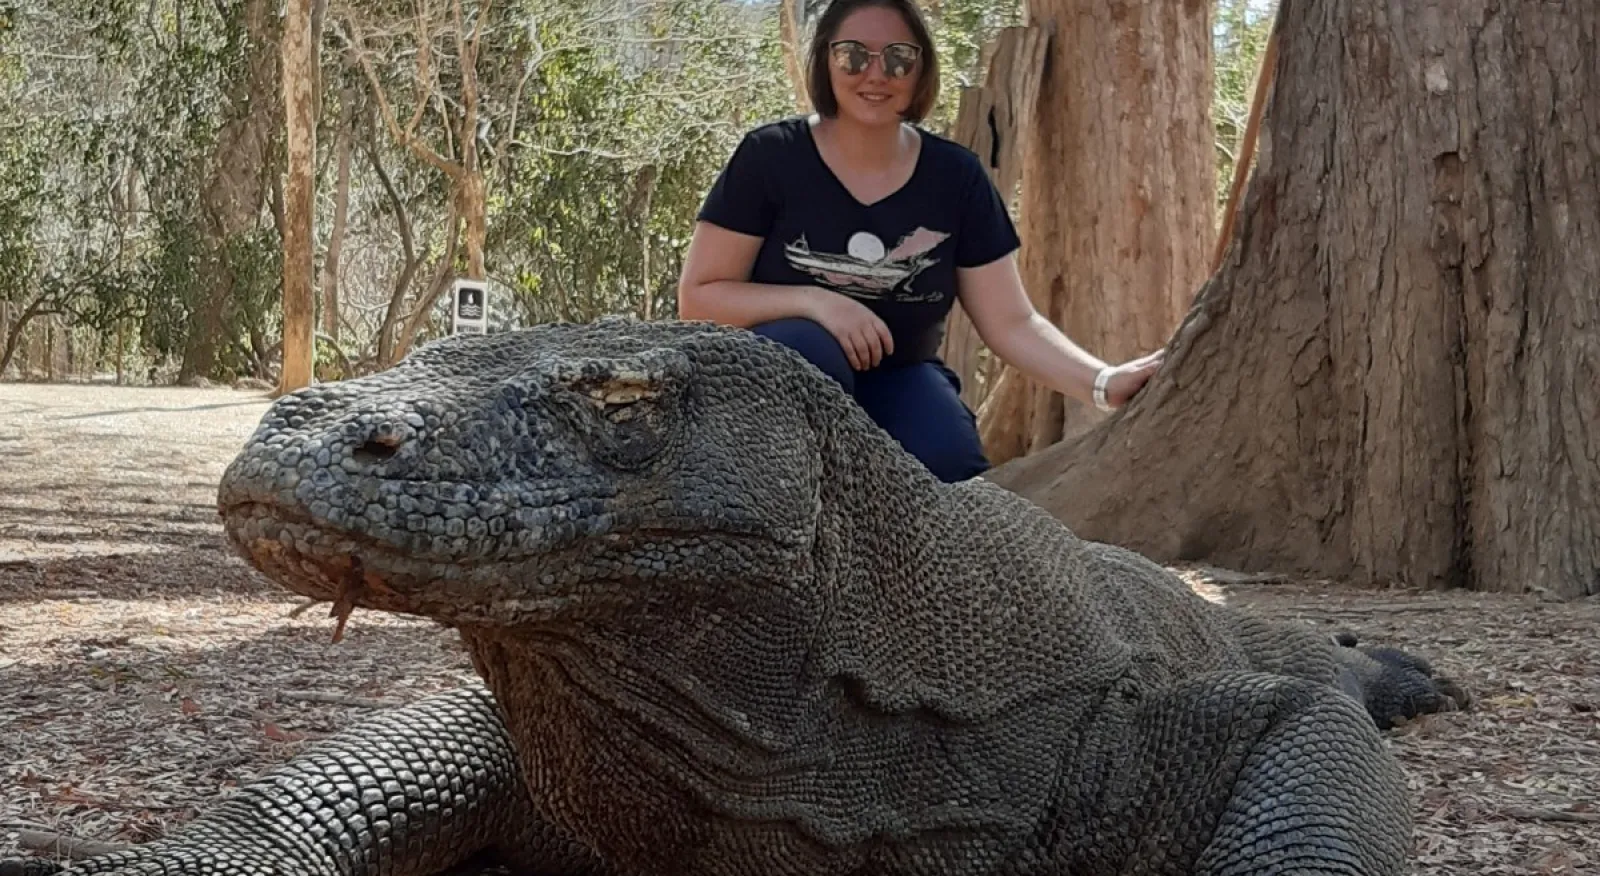 A woman stands behind a komodo dragon.